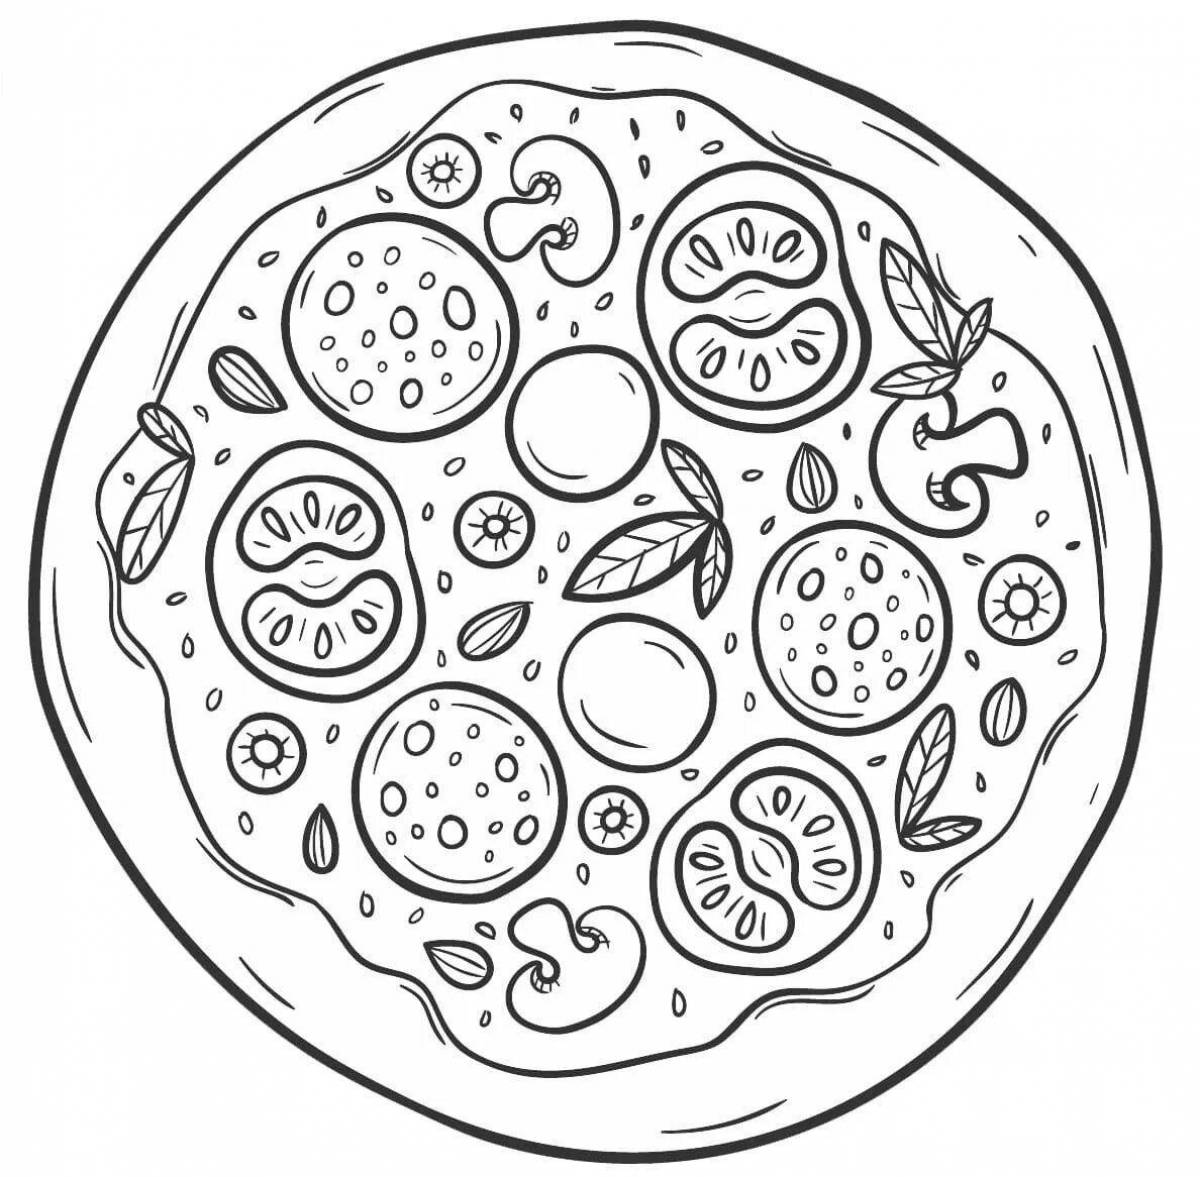 Playful pizzeria coloring page